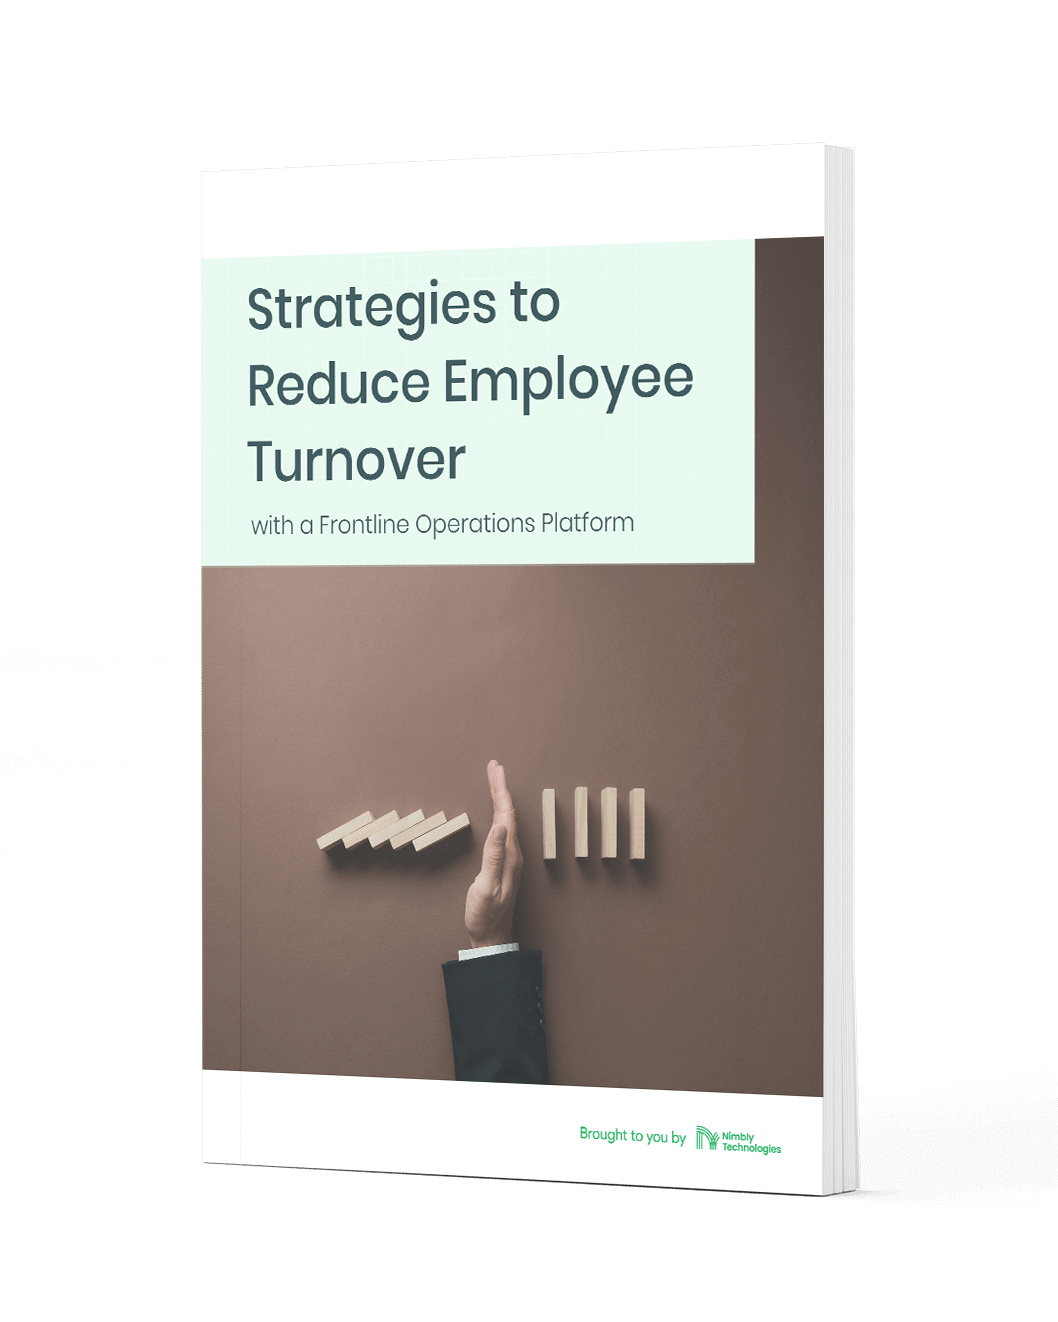 Strategies to Reduce Employee Turnover with a Frontline Operations Platform Free E-Book brought to you by Nimbly Technologies